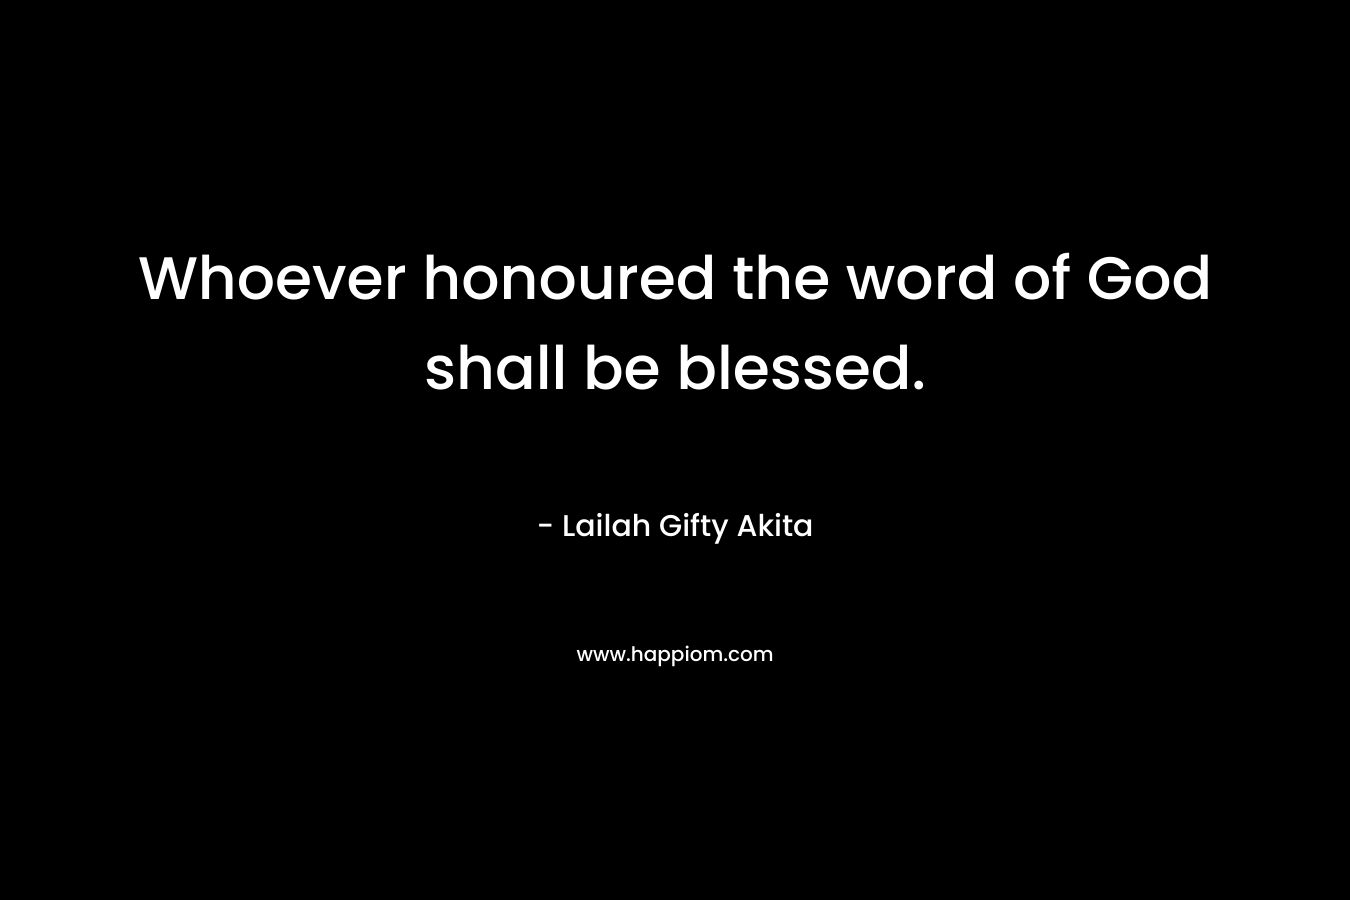 Whoever honoured the word of God shall be blessed.